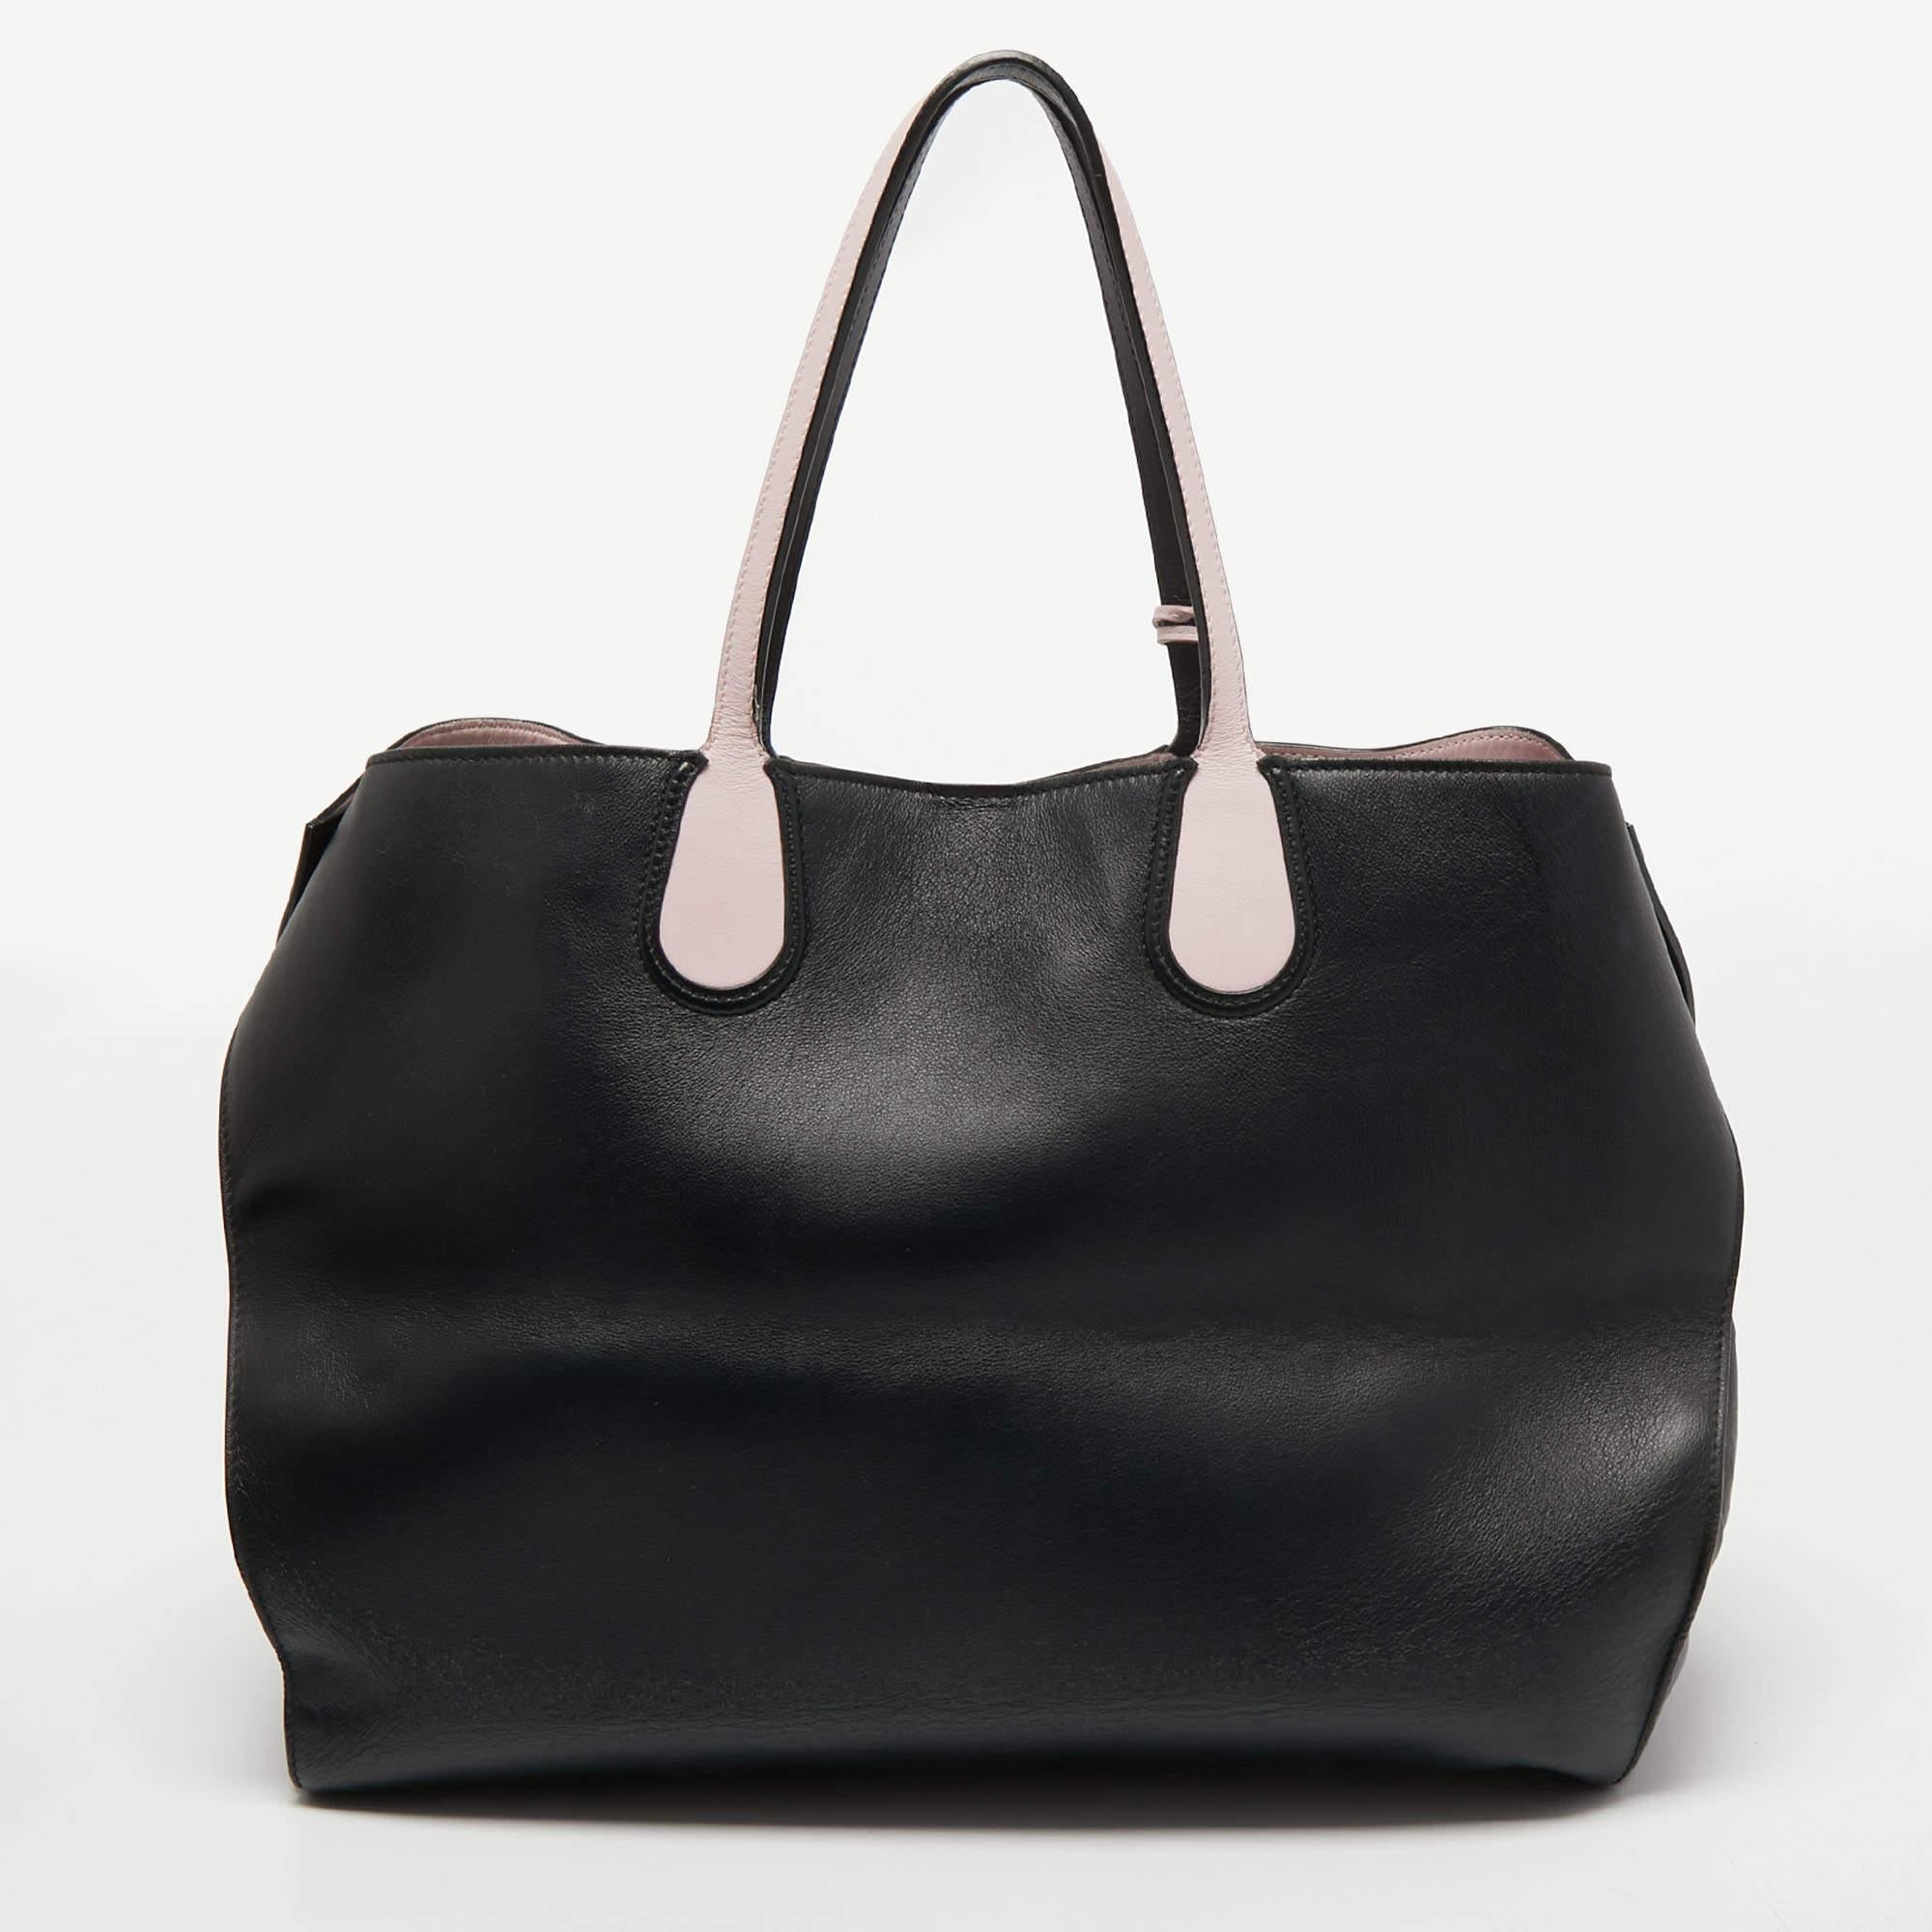 This Dior Addict shopper tote for women is super classy and functional, perfect for everyday use. We like the simple details and its high-quality finish.

